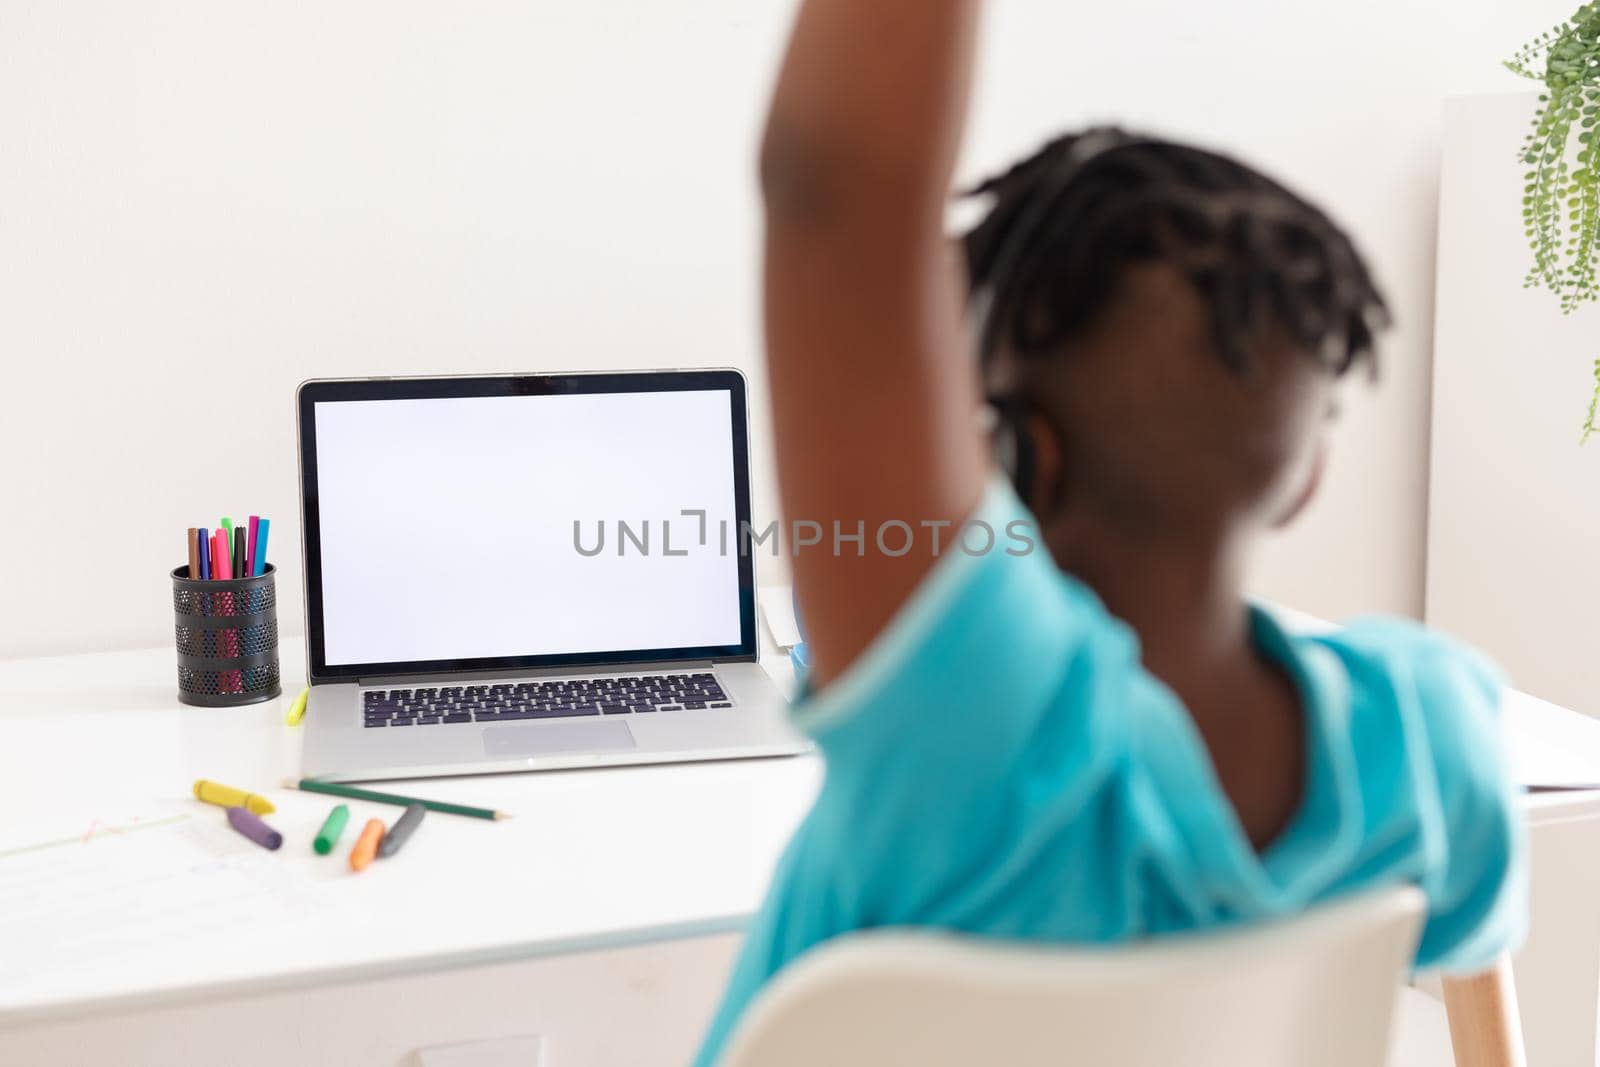 African american boy at desk using laptop with copy space for online school lesson and raising hand. staying at home in isolation during quarantine lockdown.